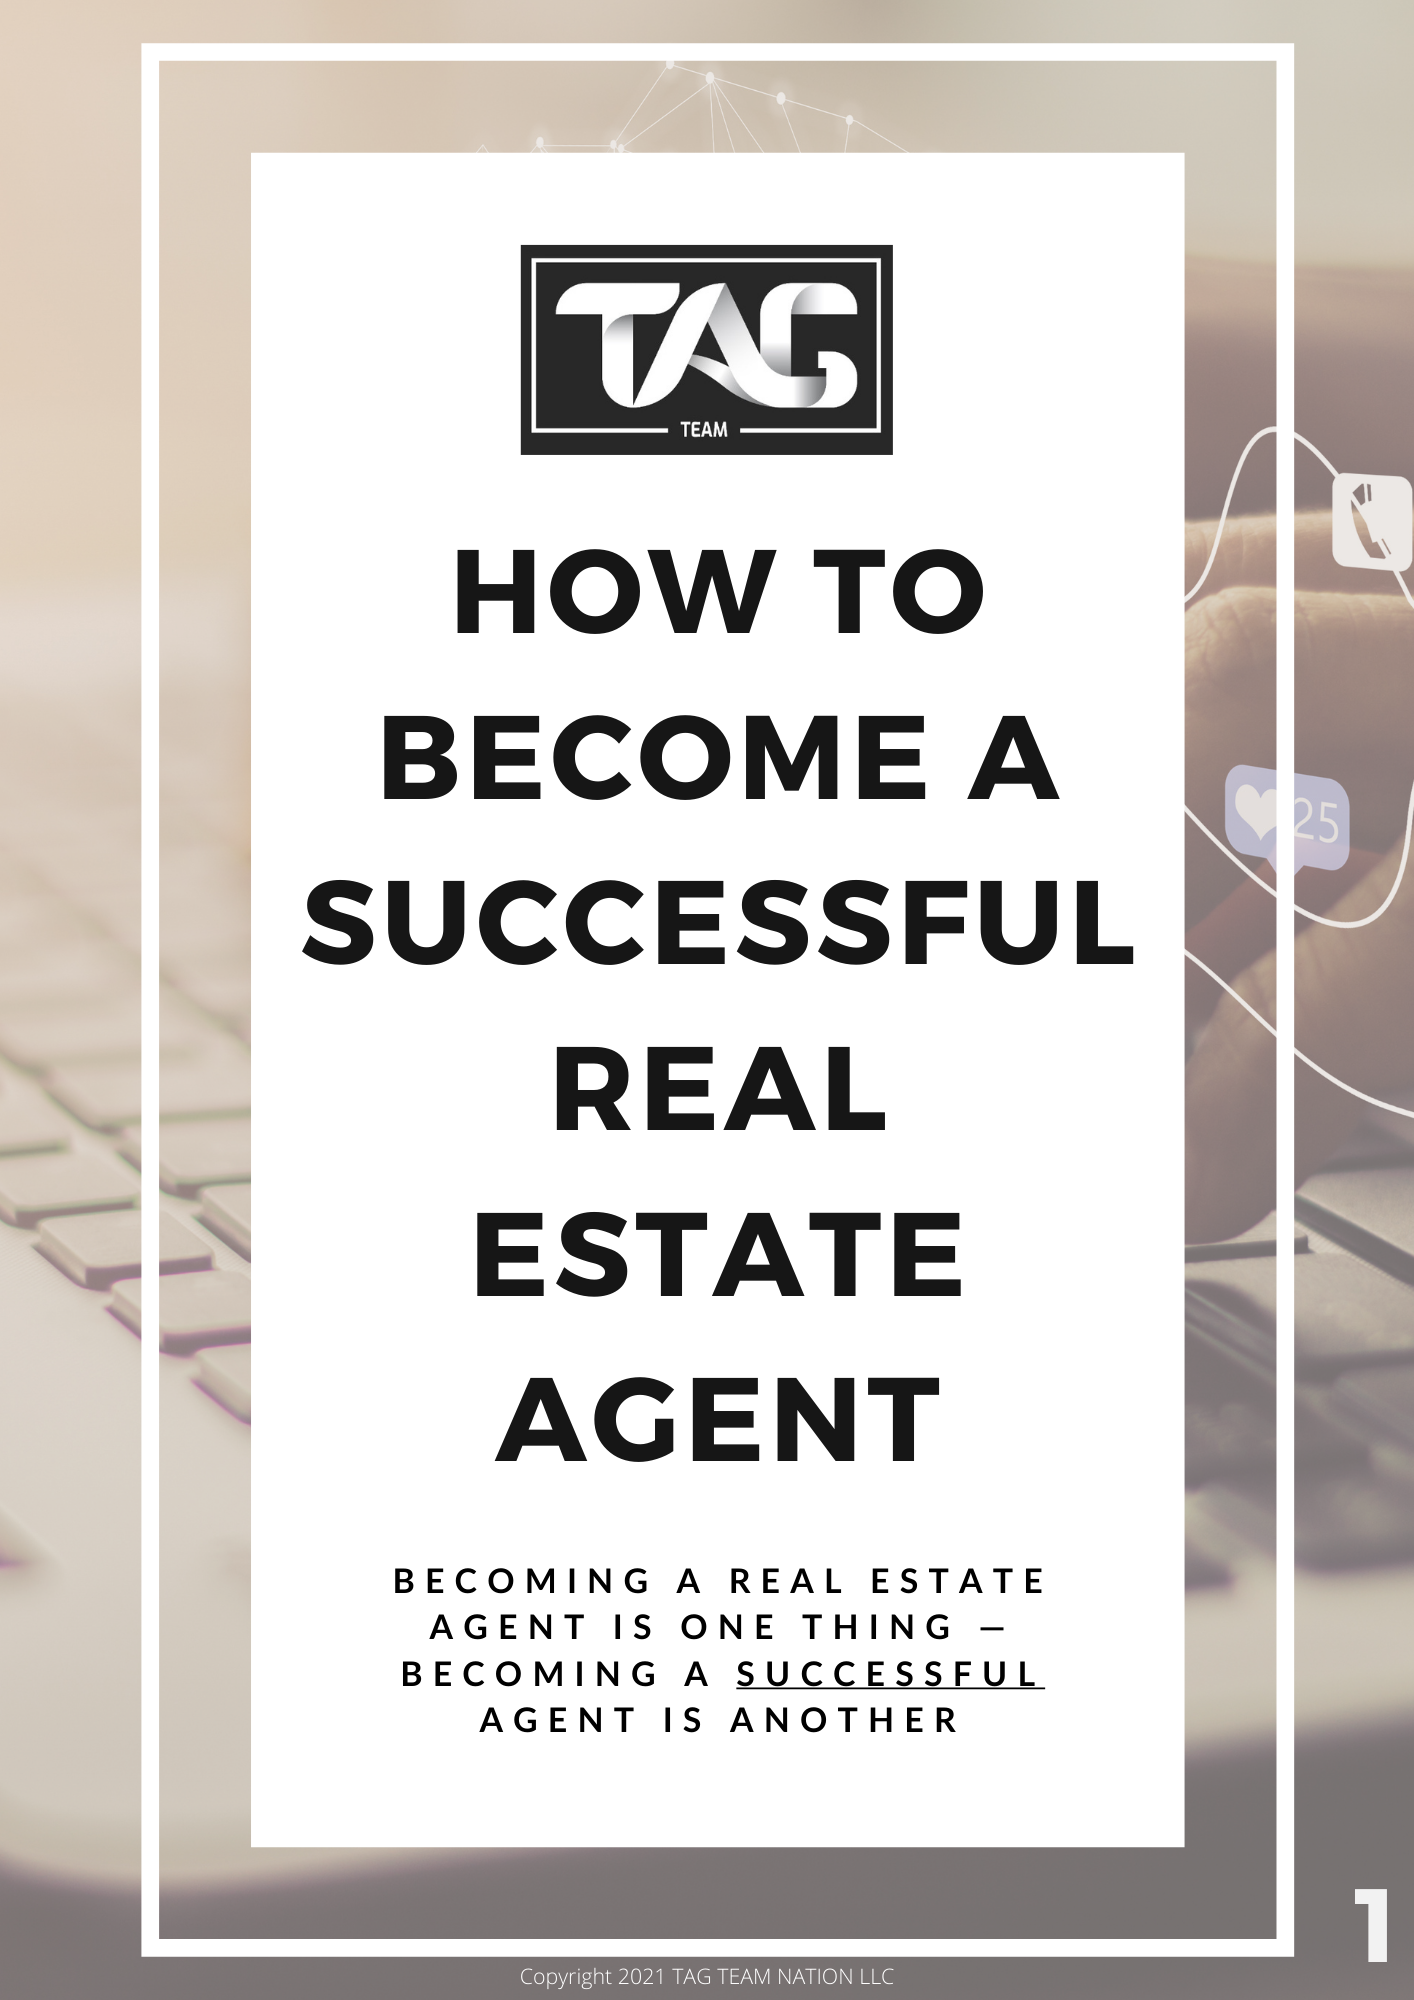 How To Become a Successful Real Estate Agent